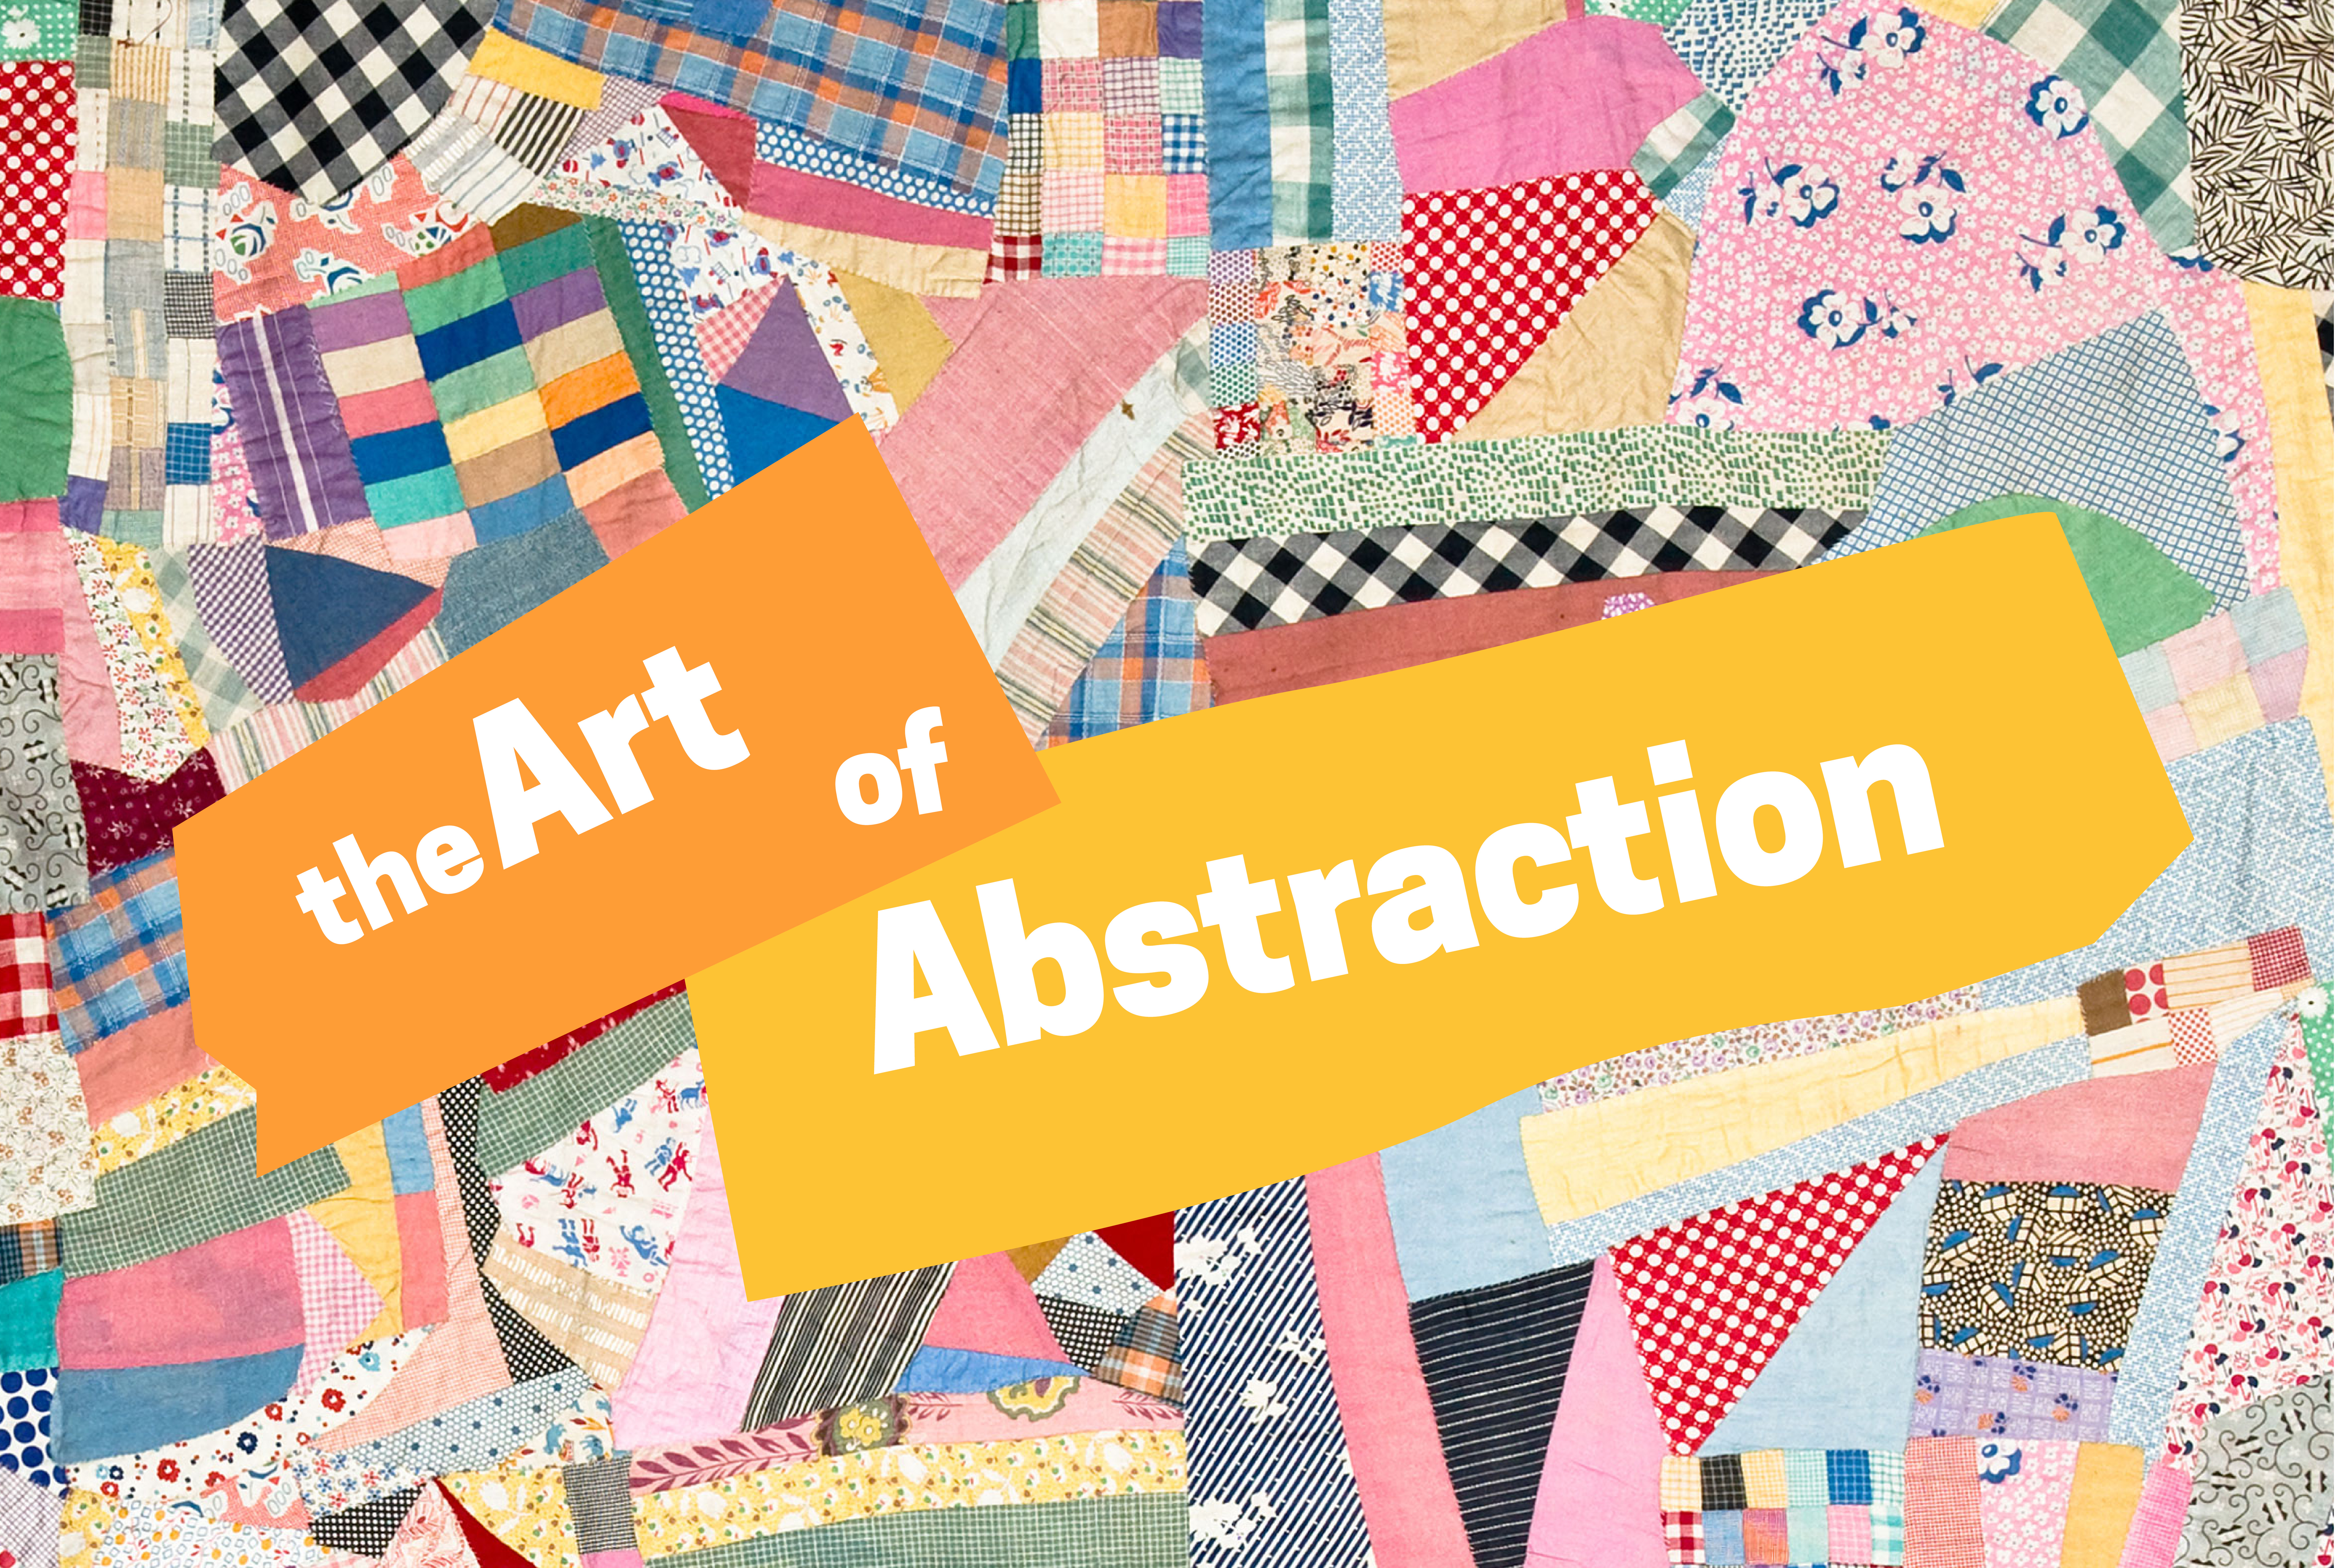 The Art of Abstraction Lecture Series: Textiles and Abstraction